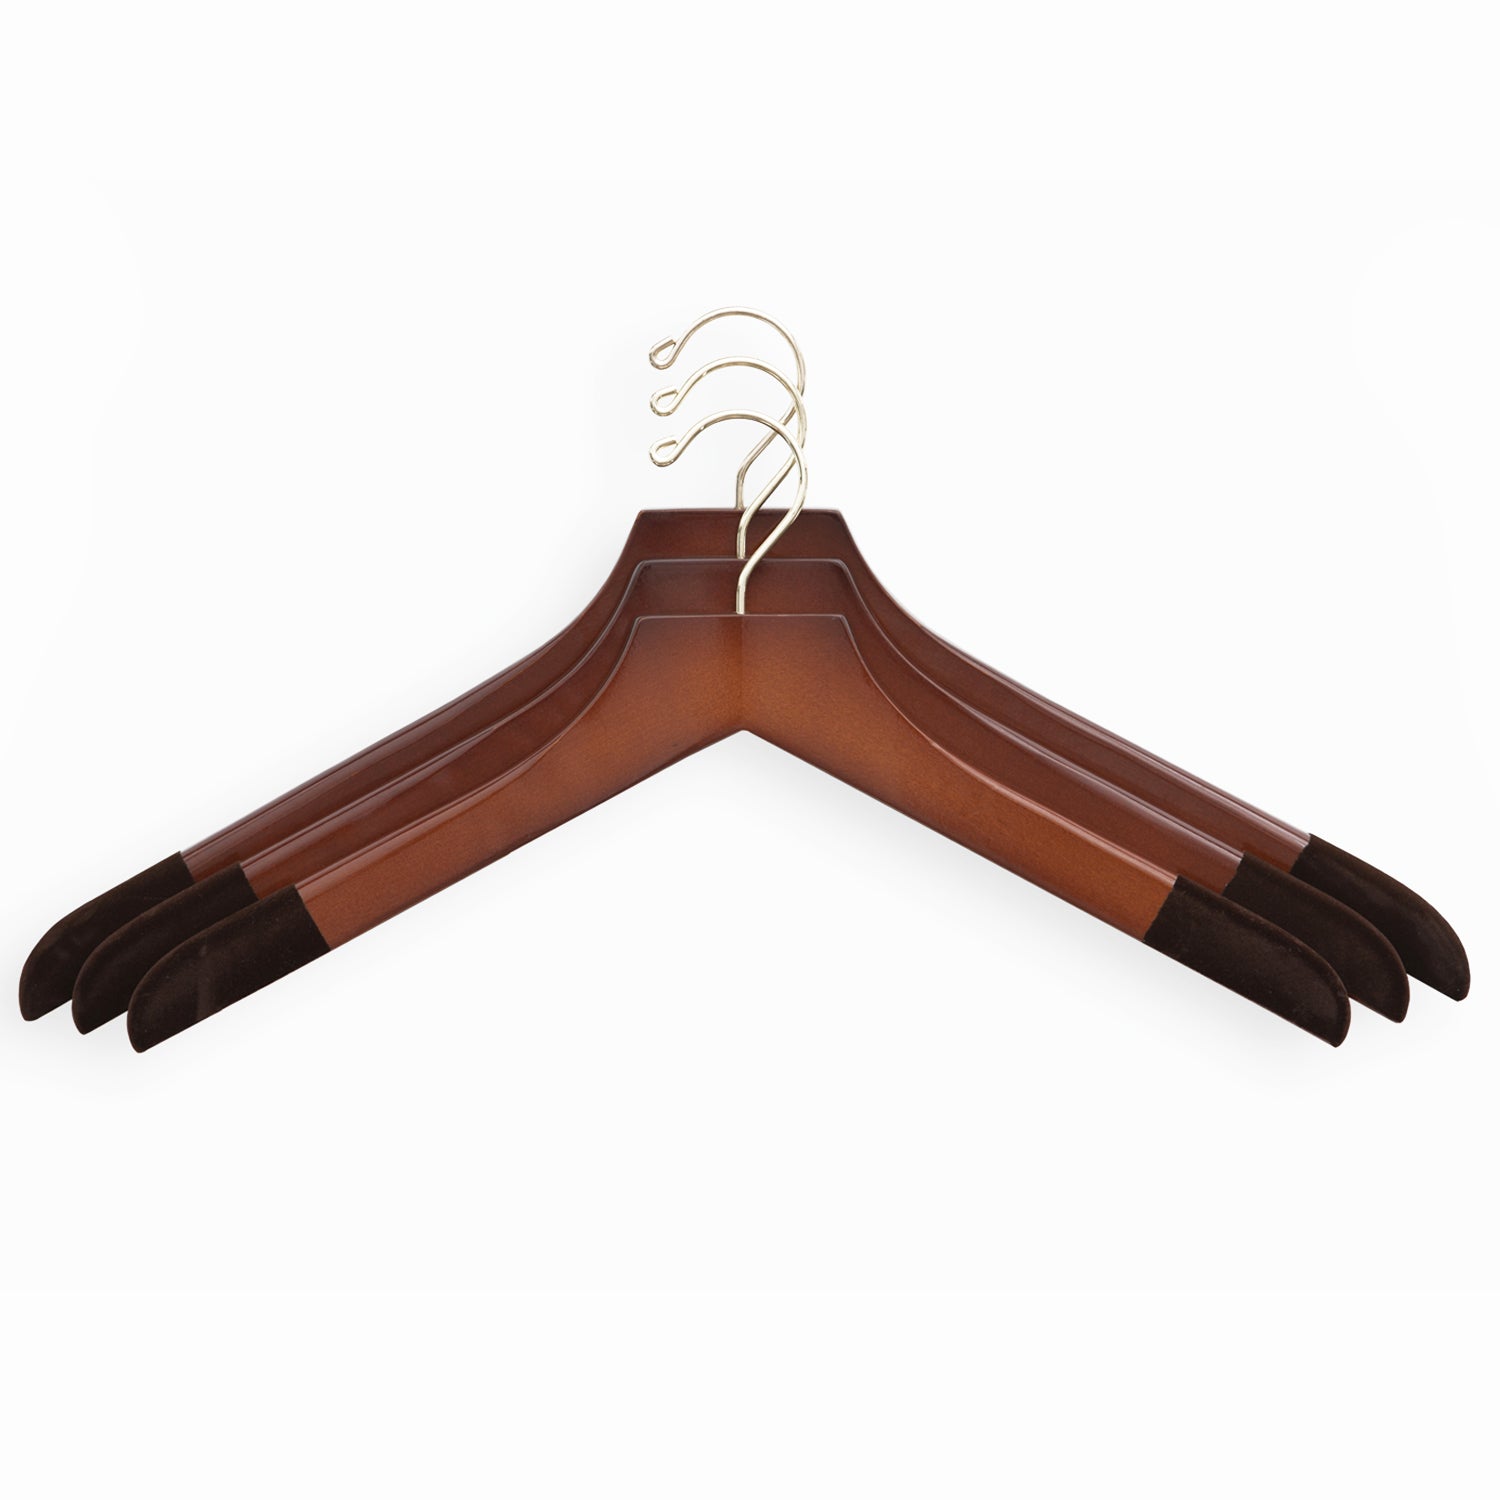 Four Extra-Large 21" Luxury Wooden Sweater and Polo Hangers from KirbyAllison.com.